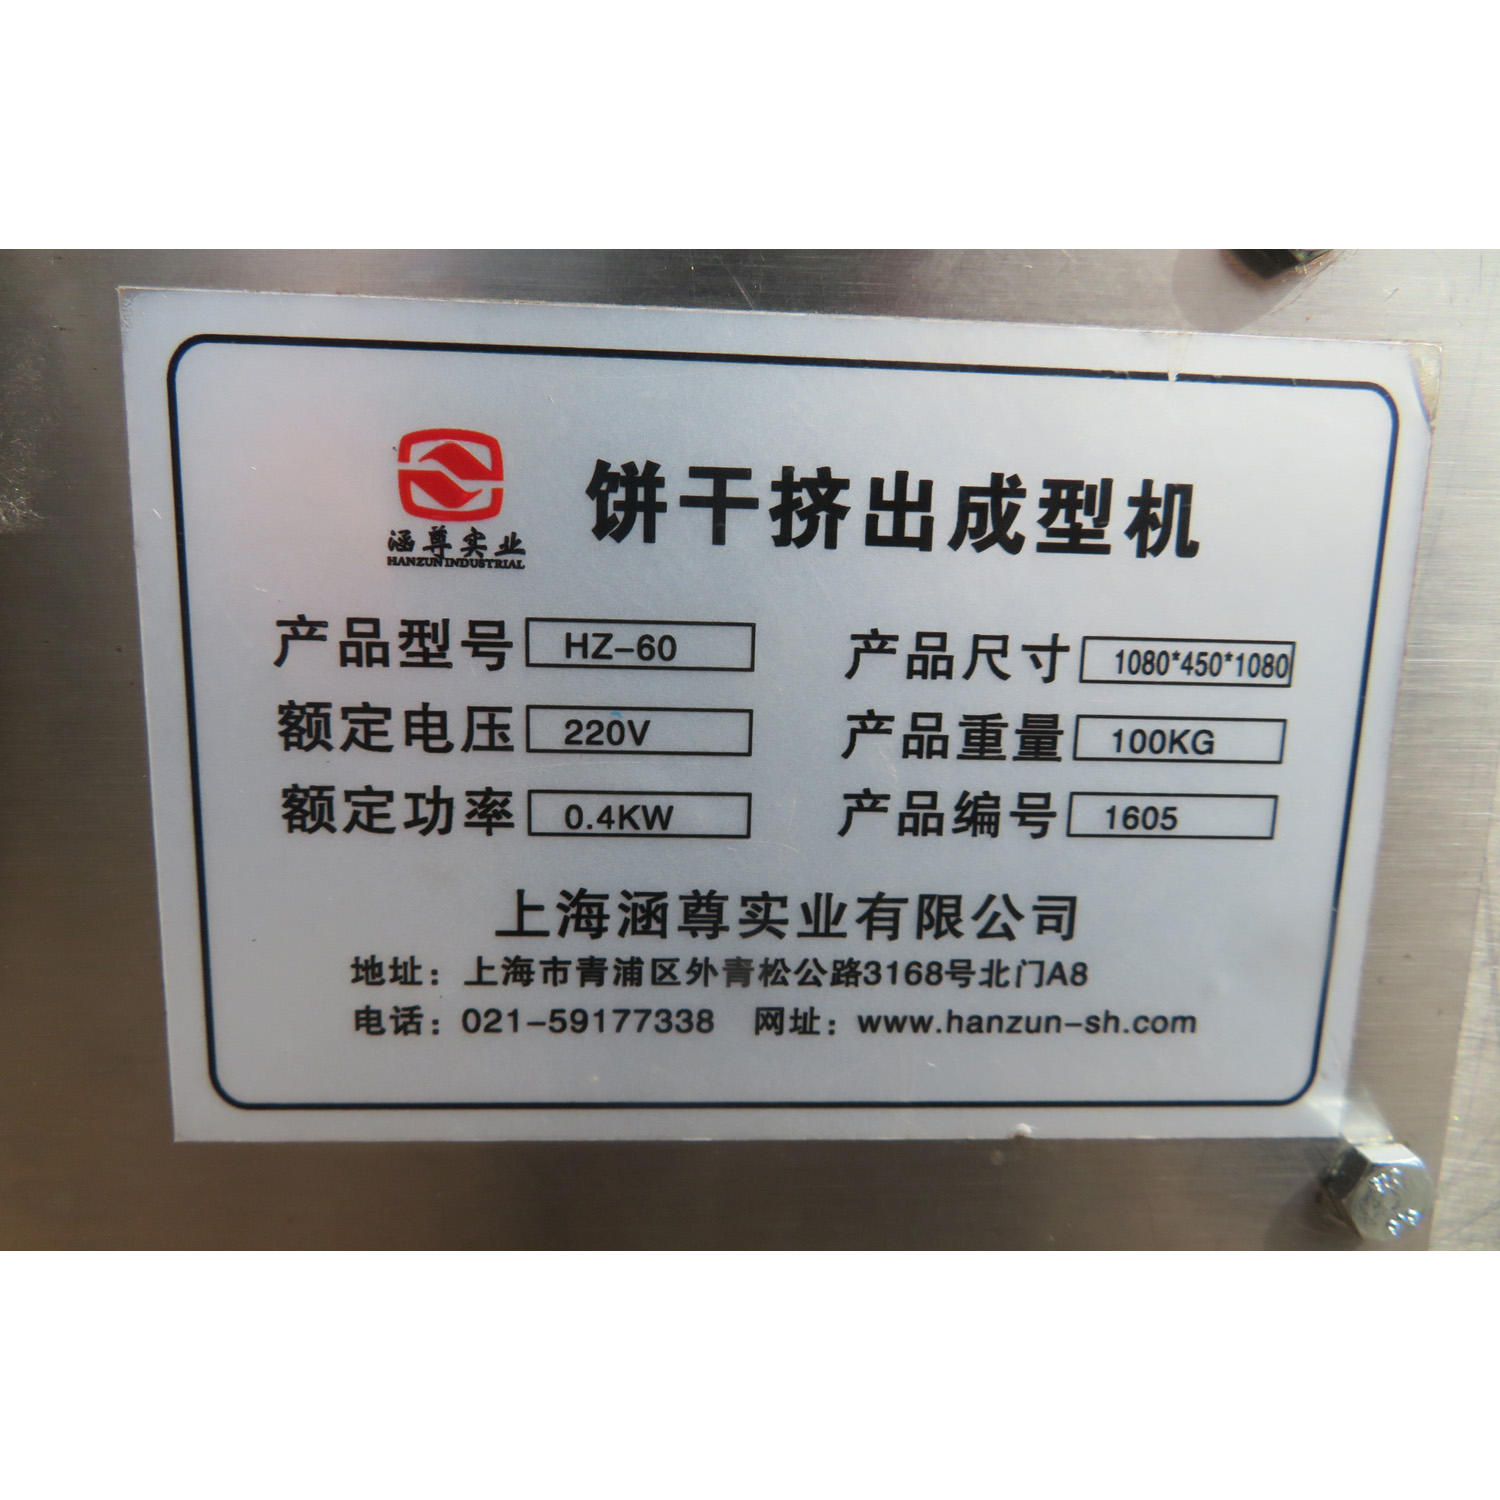 Hanzun HZ-60 Cookie Extrusion Machine, Used Great Condition image 4